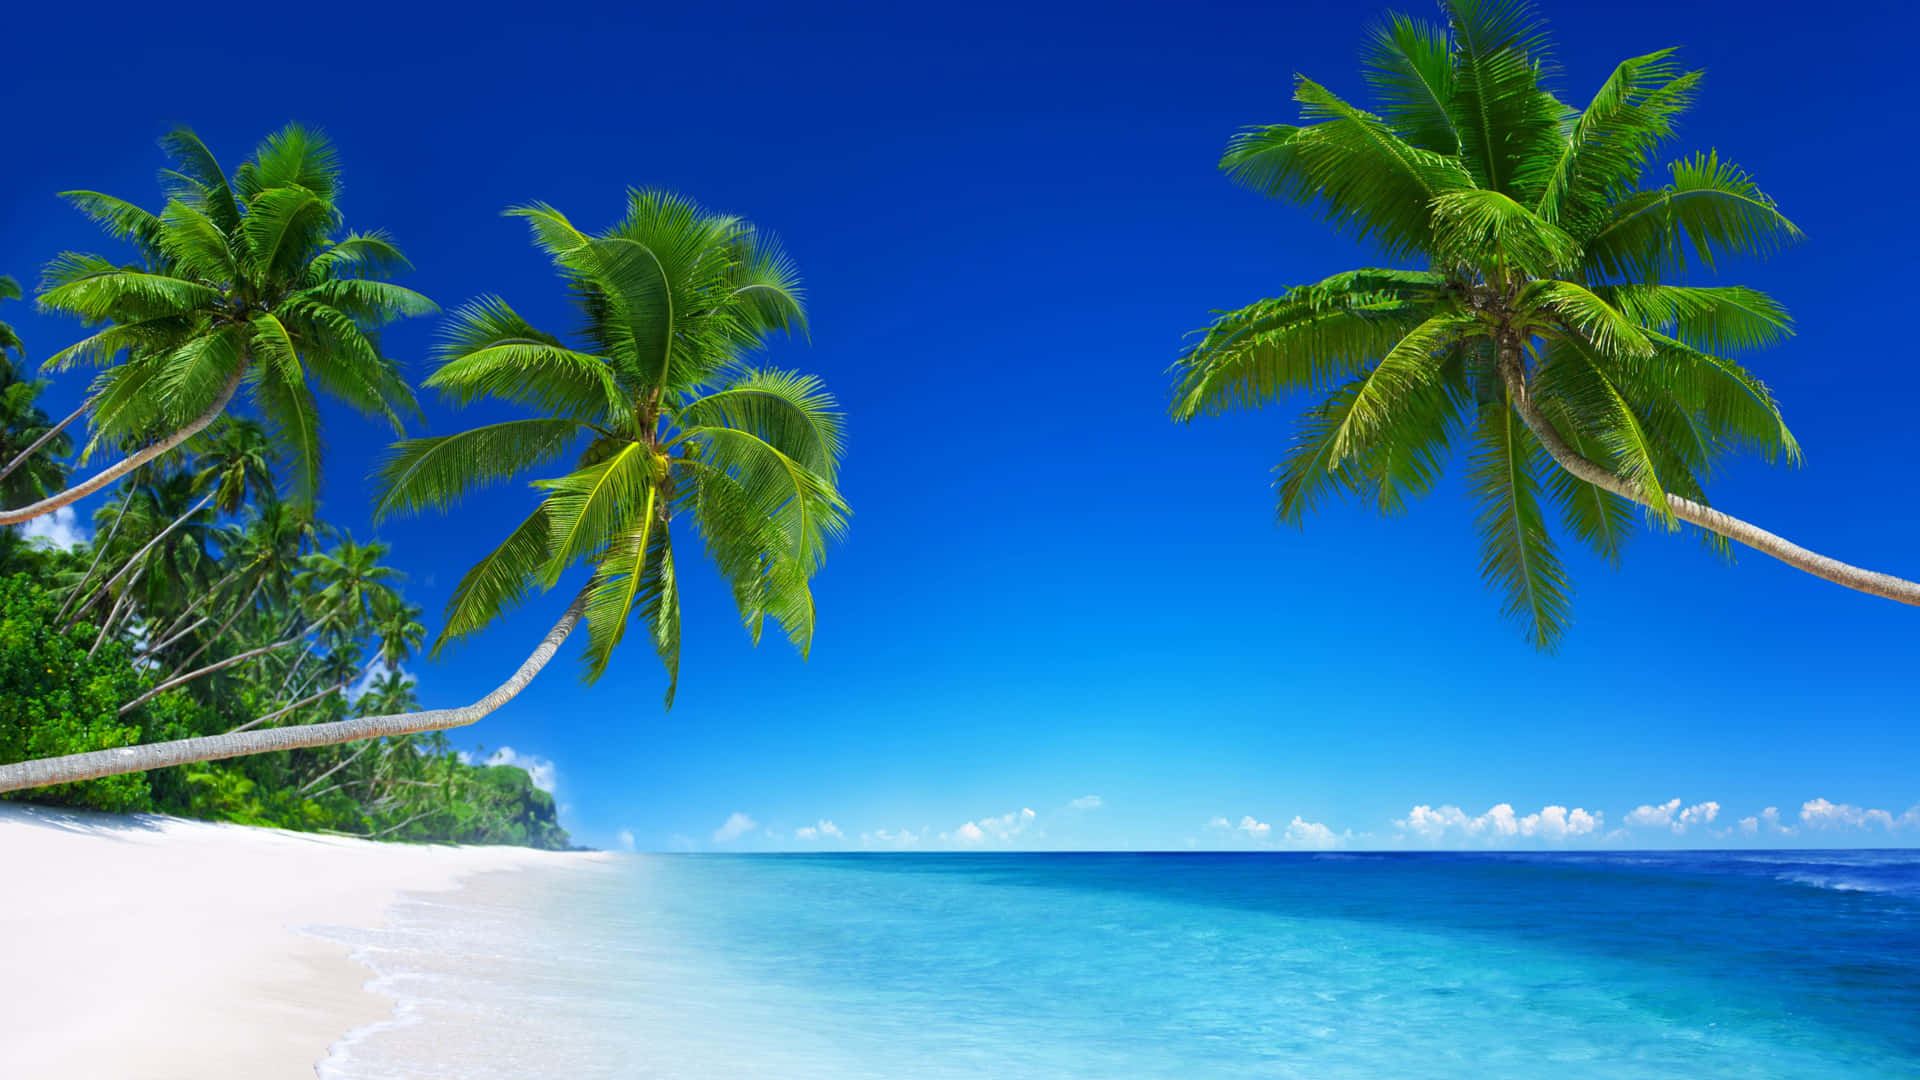 Two Palm Trees On A Beach With Blue Water Wallpaper